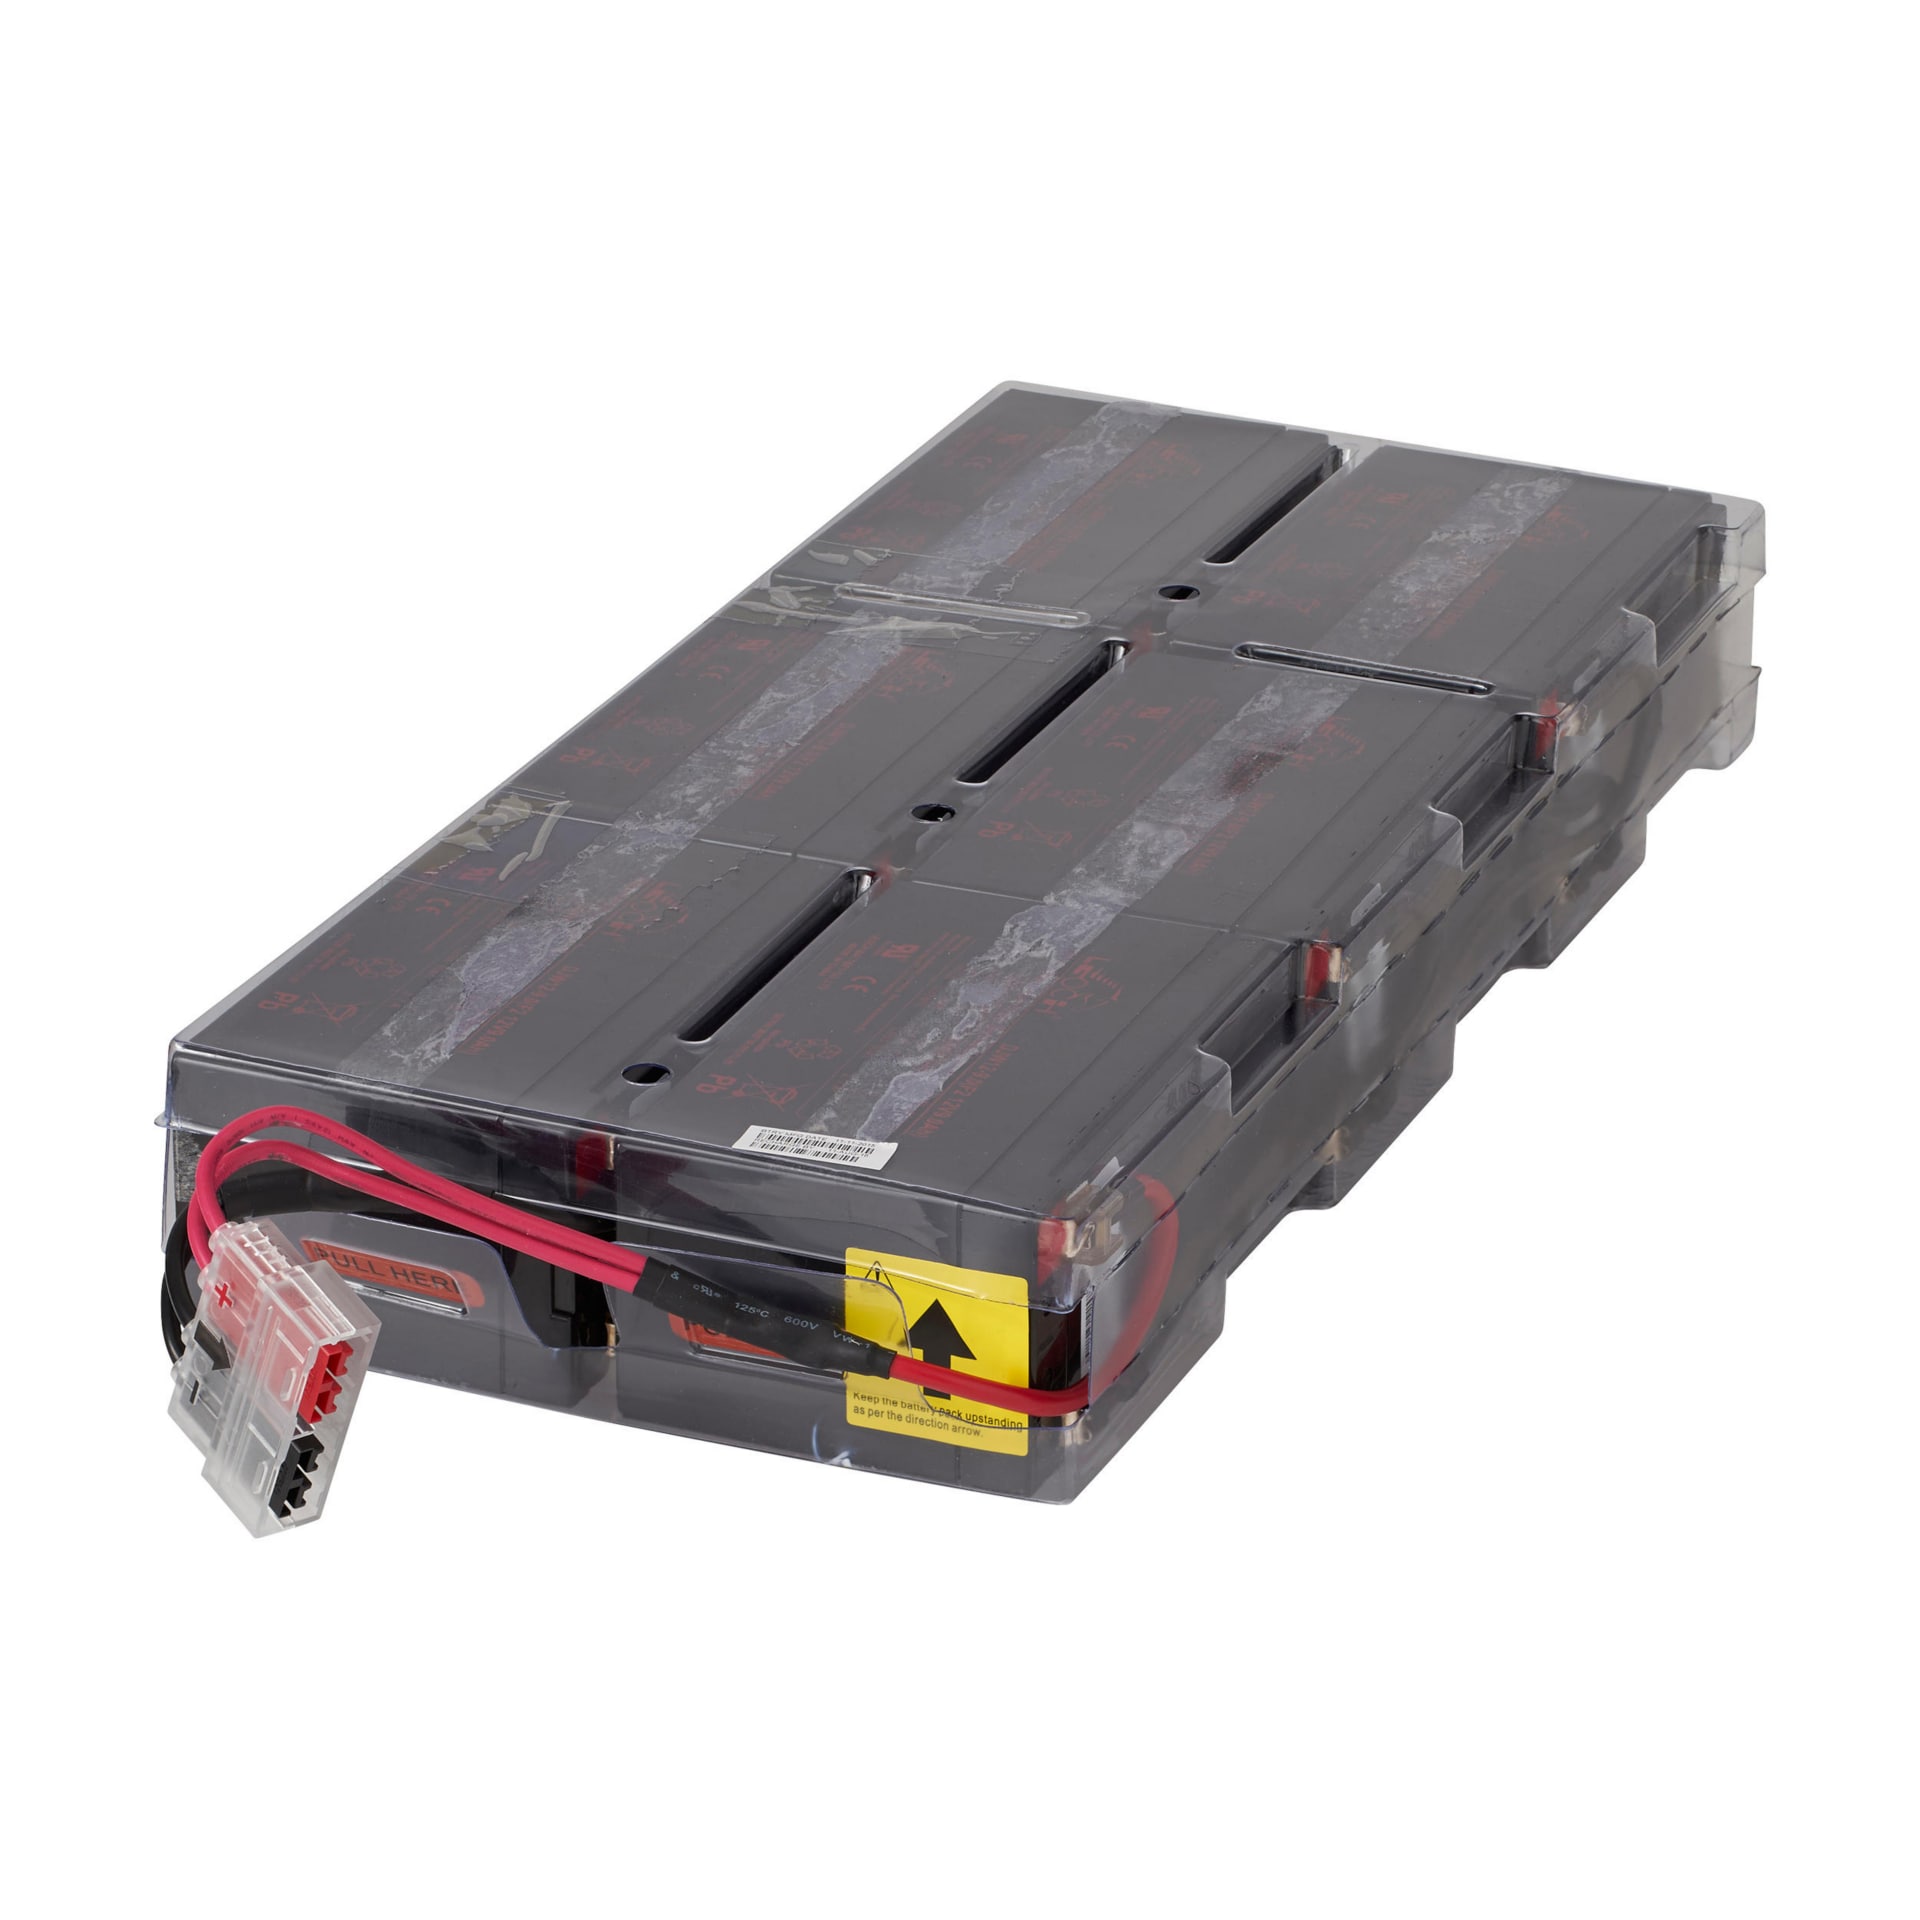 Eaton Internal Replacement Battery Cartridge (RBC) for 9PX1000GRT UPS System